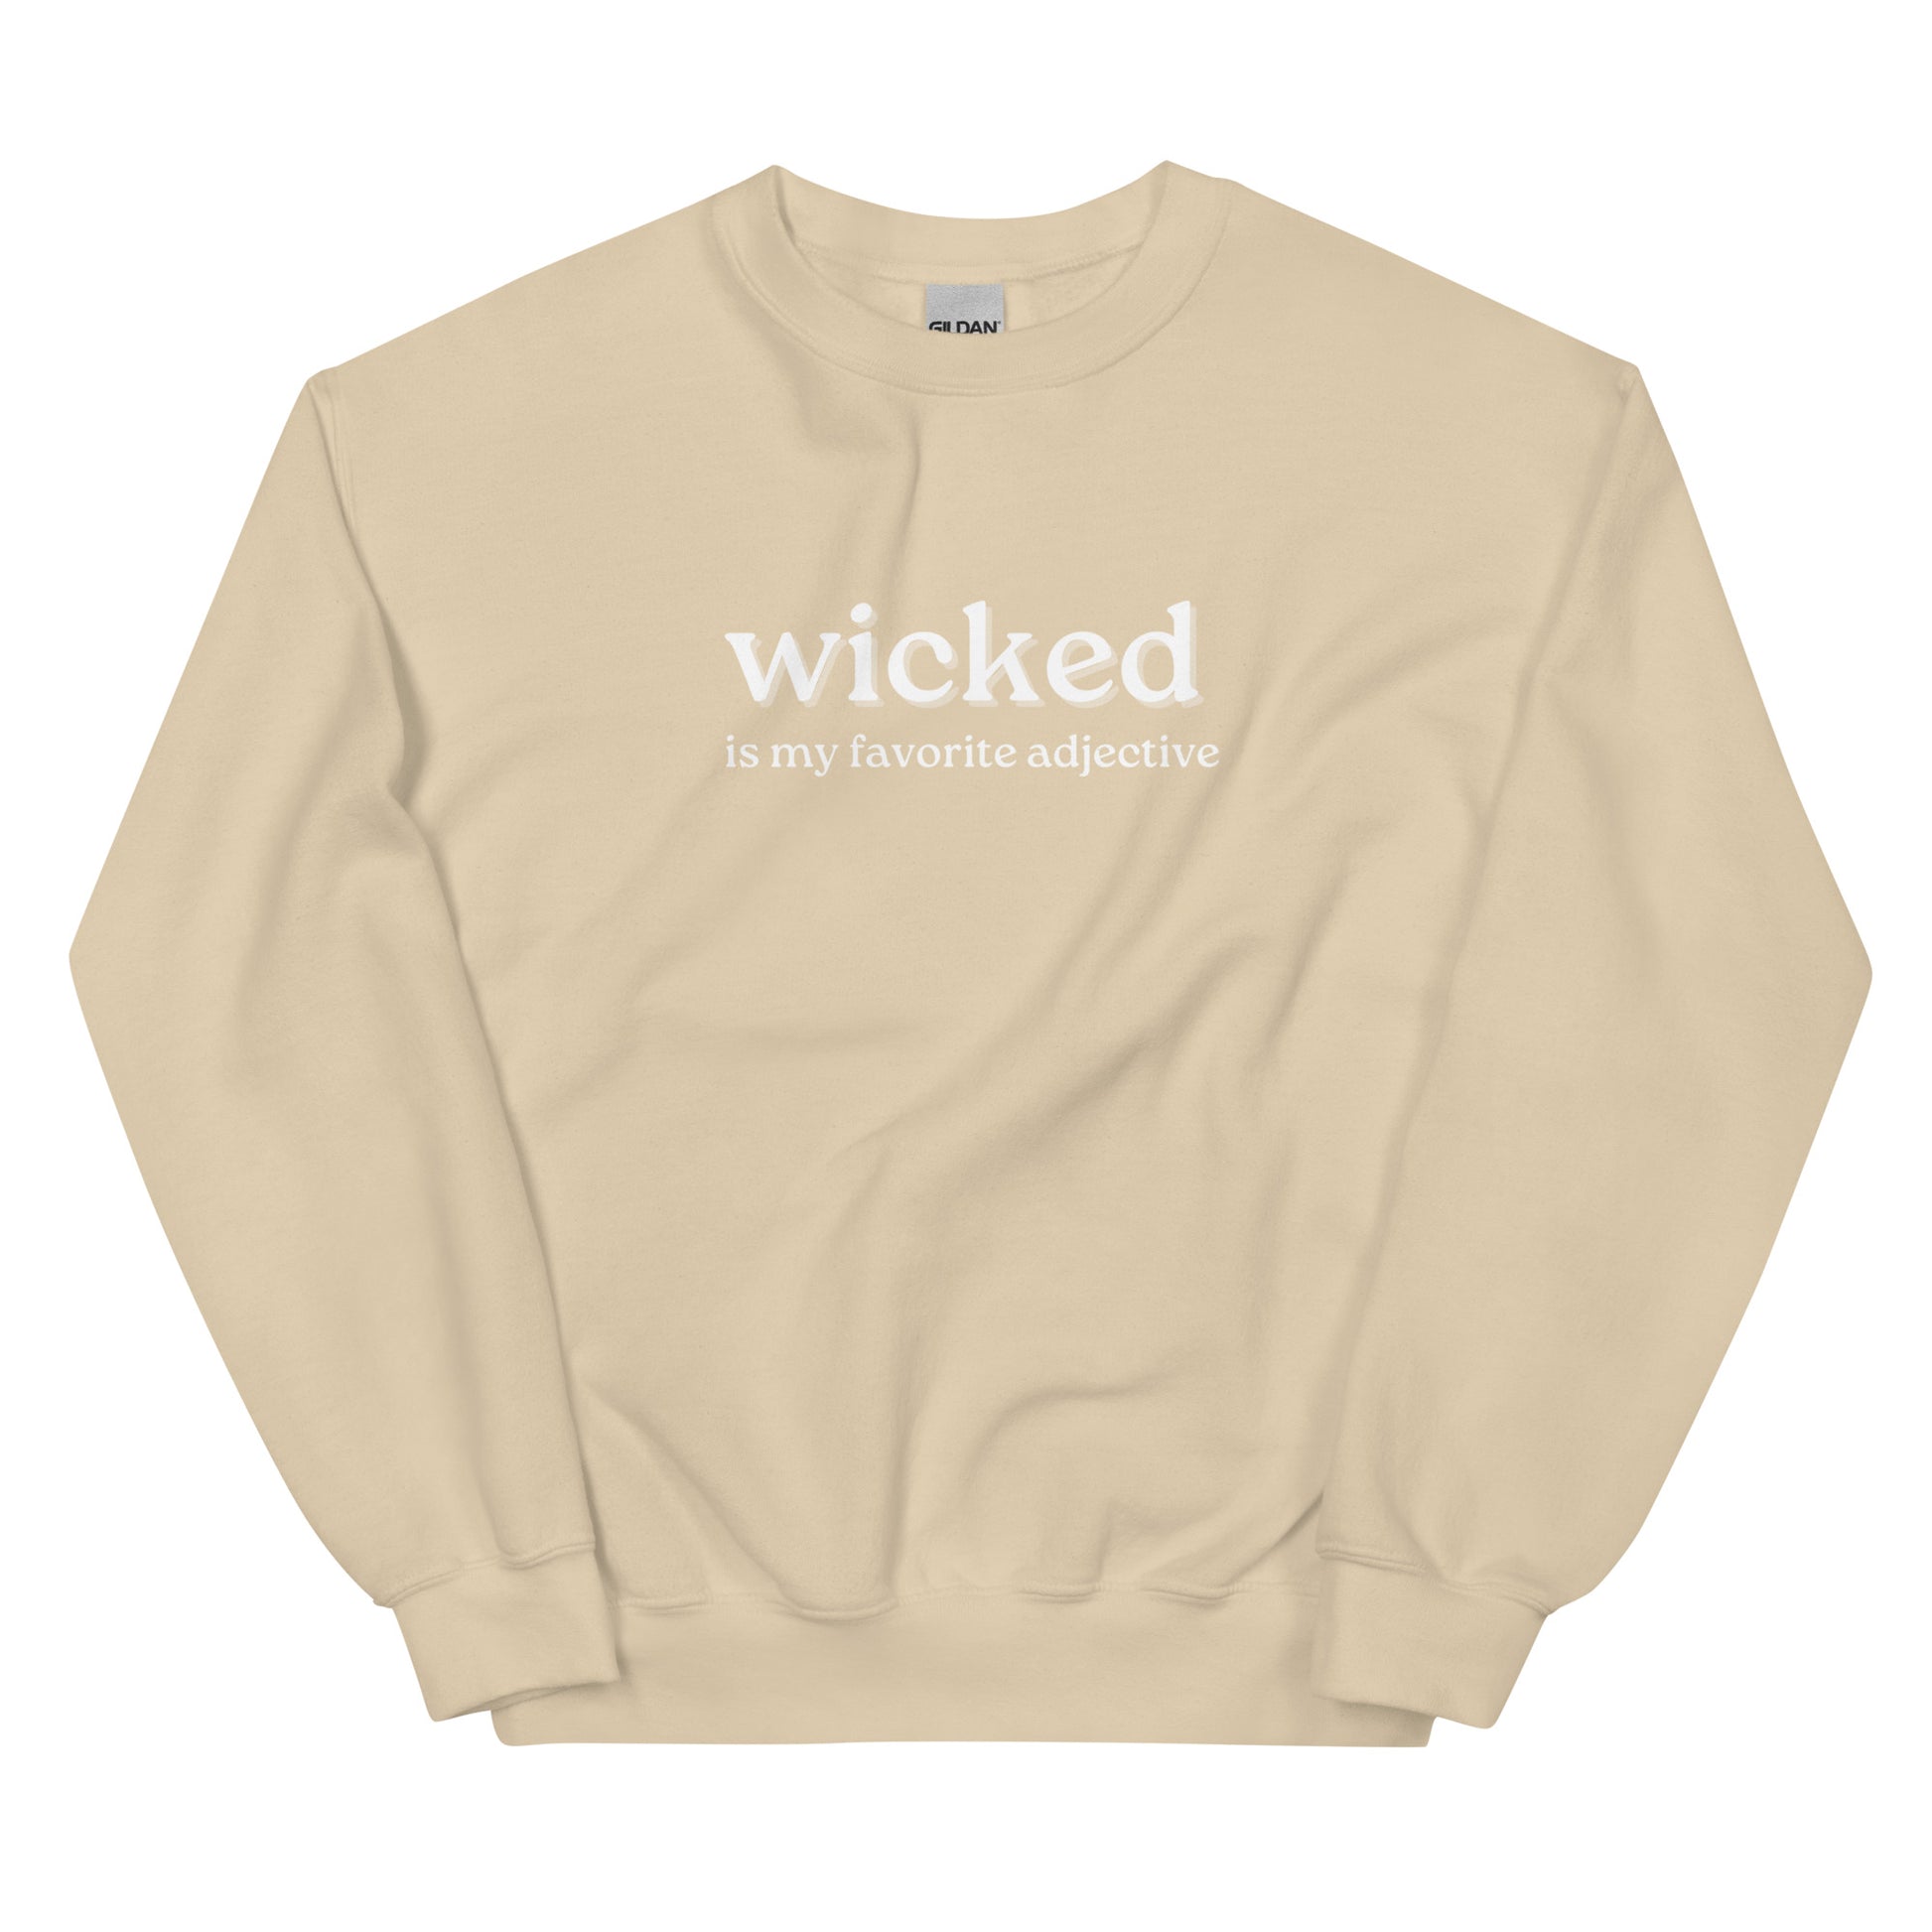 tan crewneck that says "wicked is my favorite adjective" in white lettering